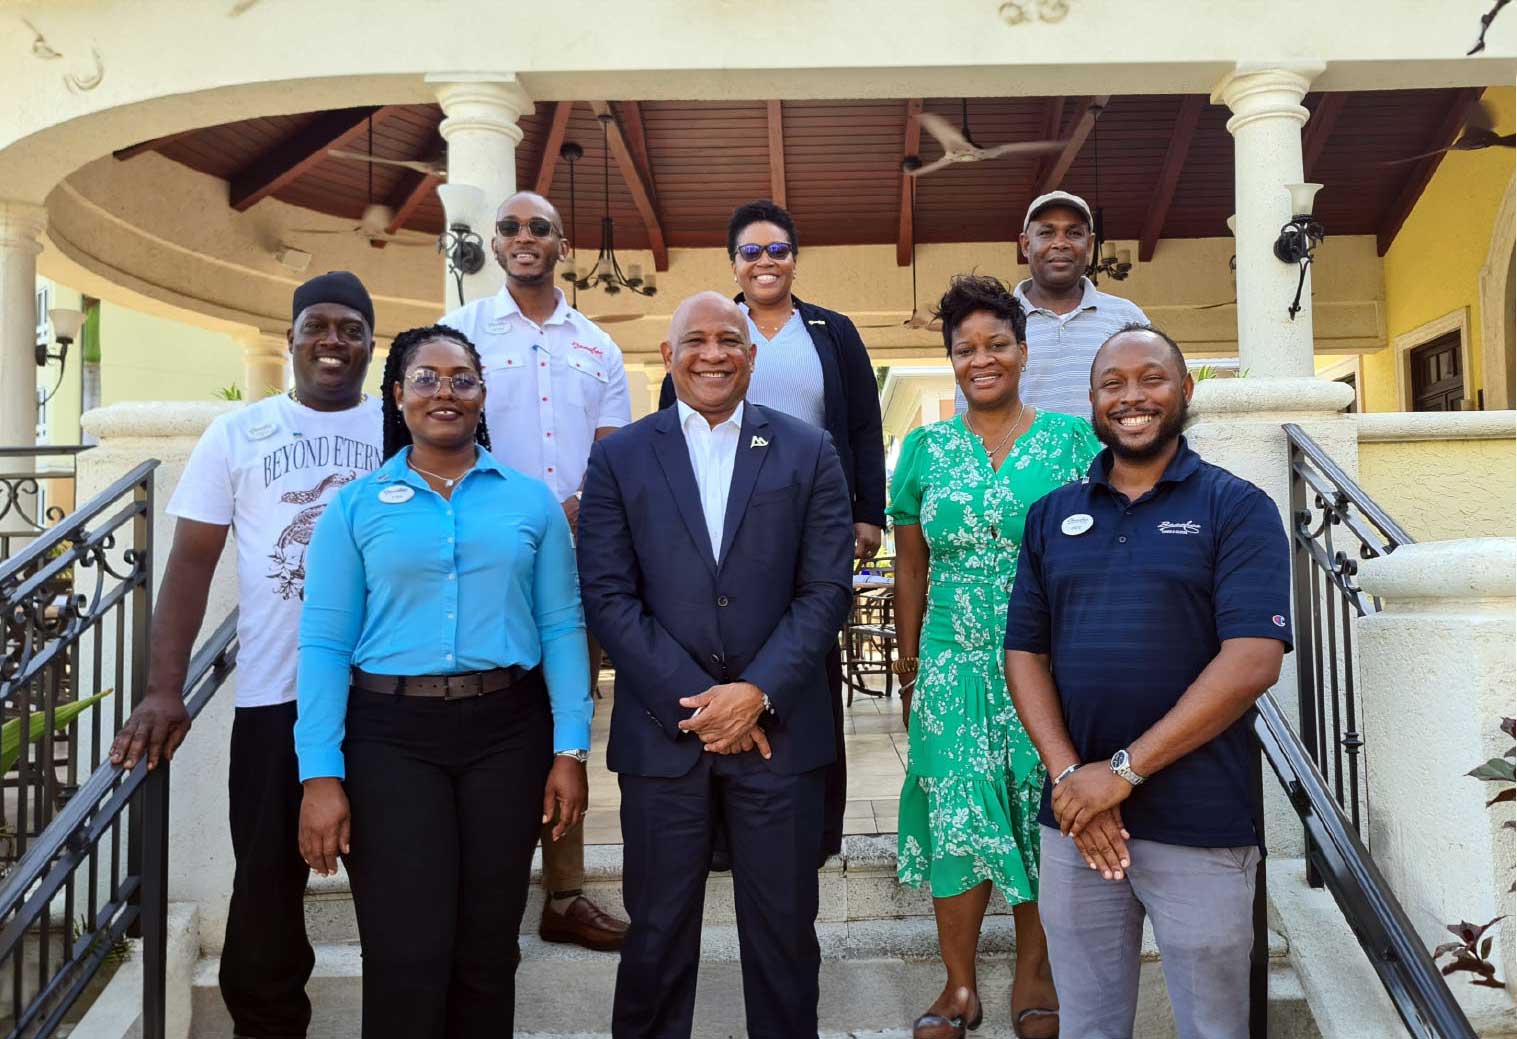 Deputy Prime Minister Dr Ernest Hilaire and SLTA CEO Lorine Charles-St. Jules meet with Saint Lucians working at Beaches Turks and Caicos